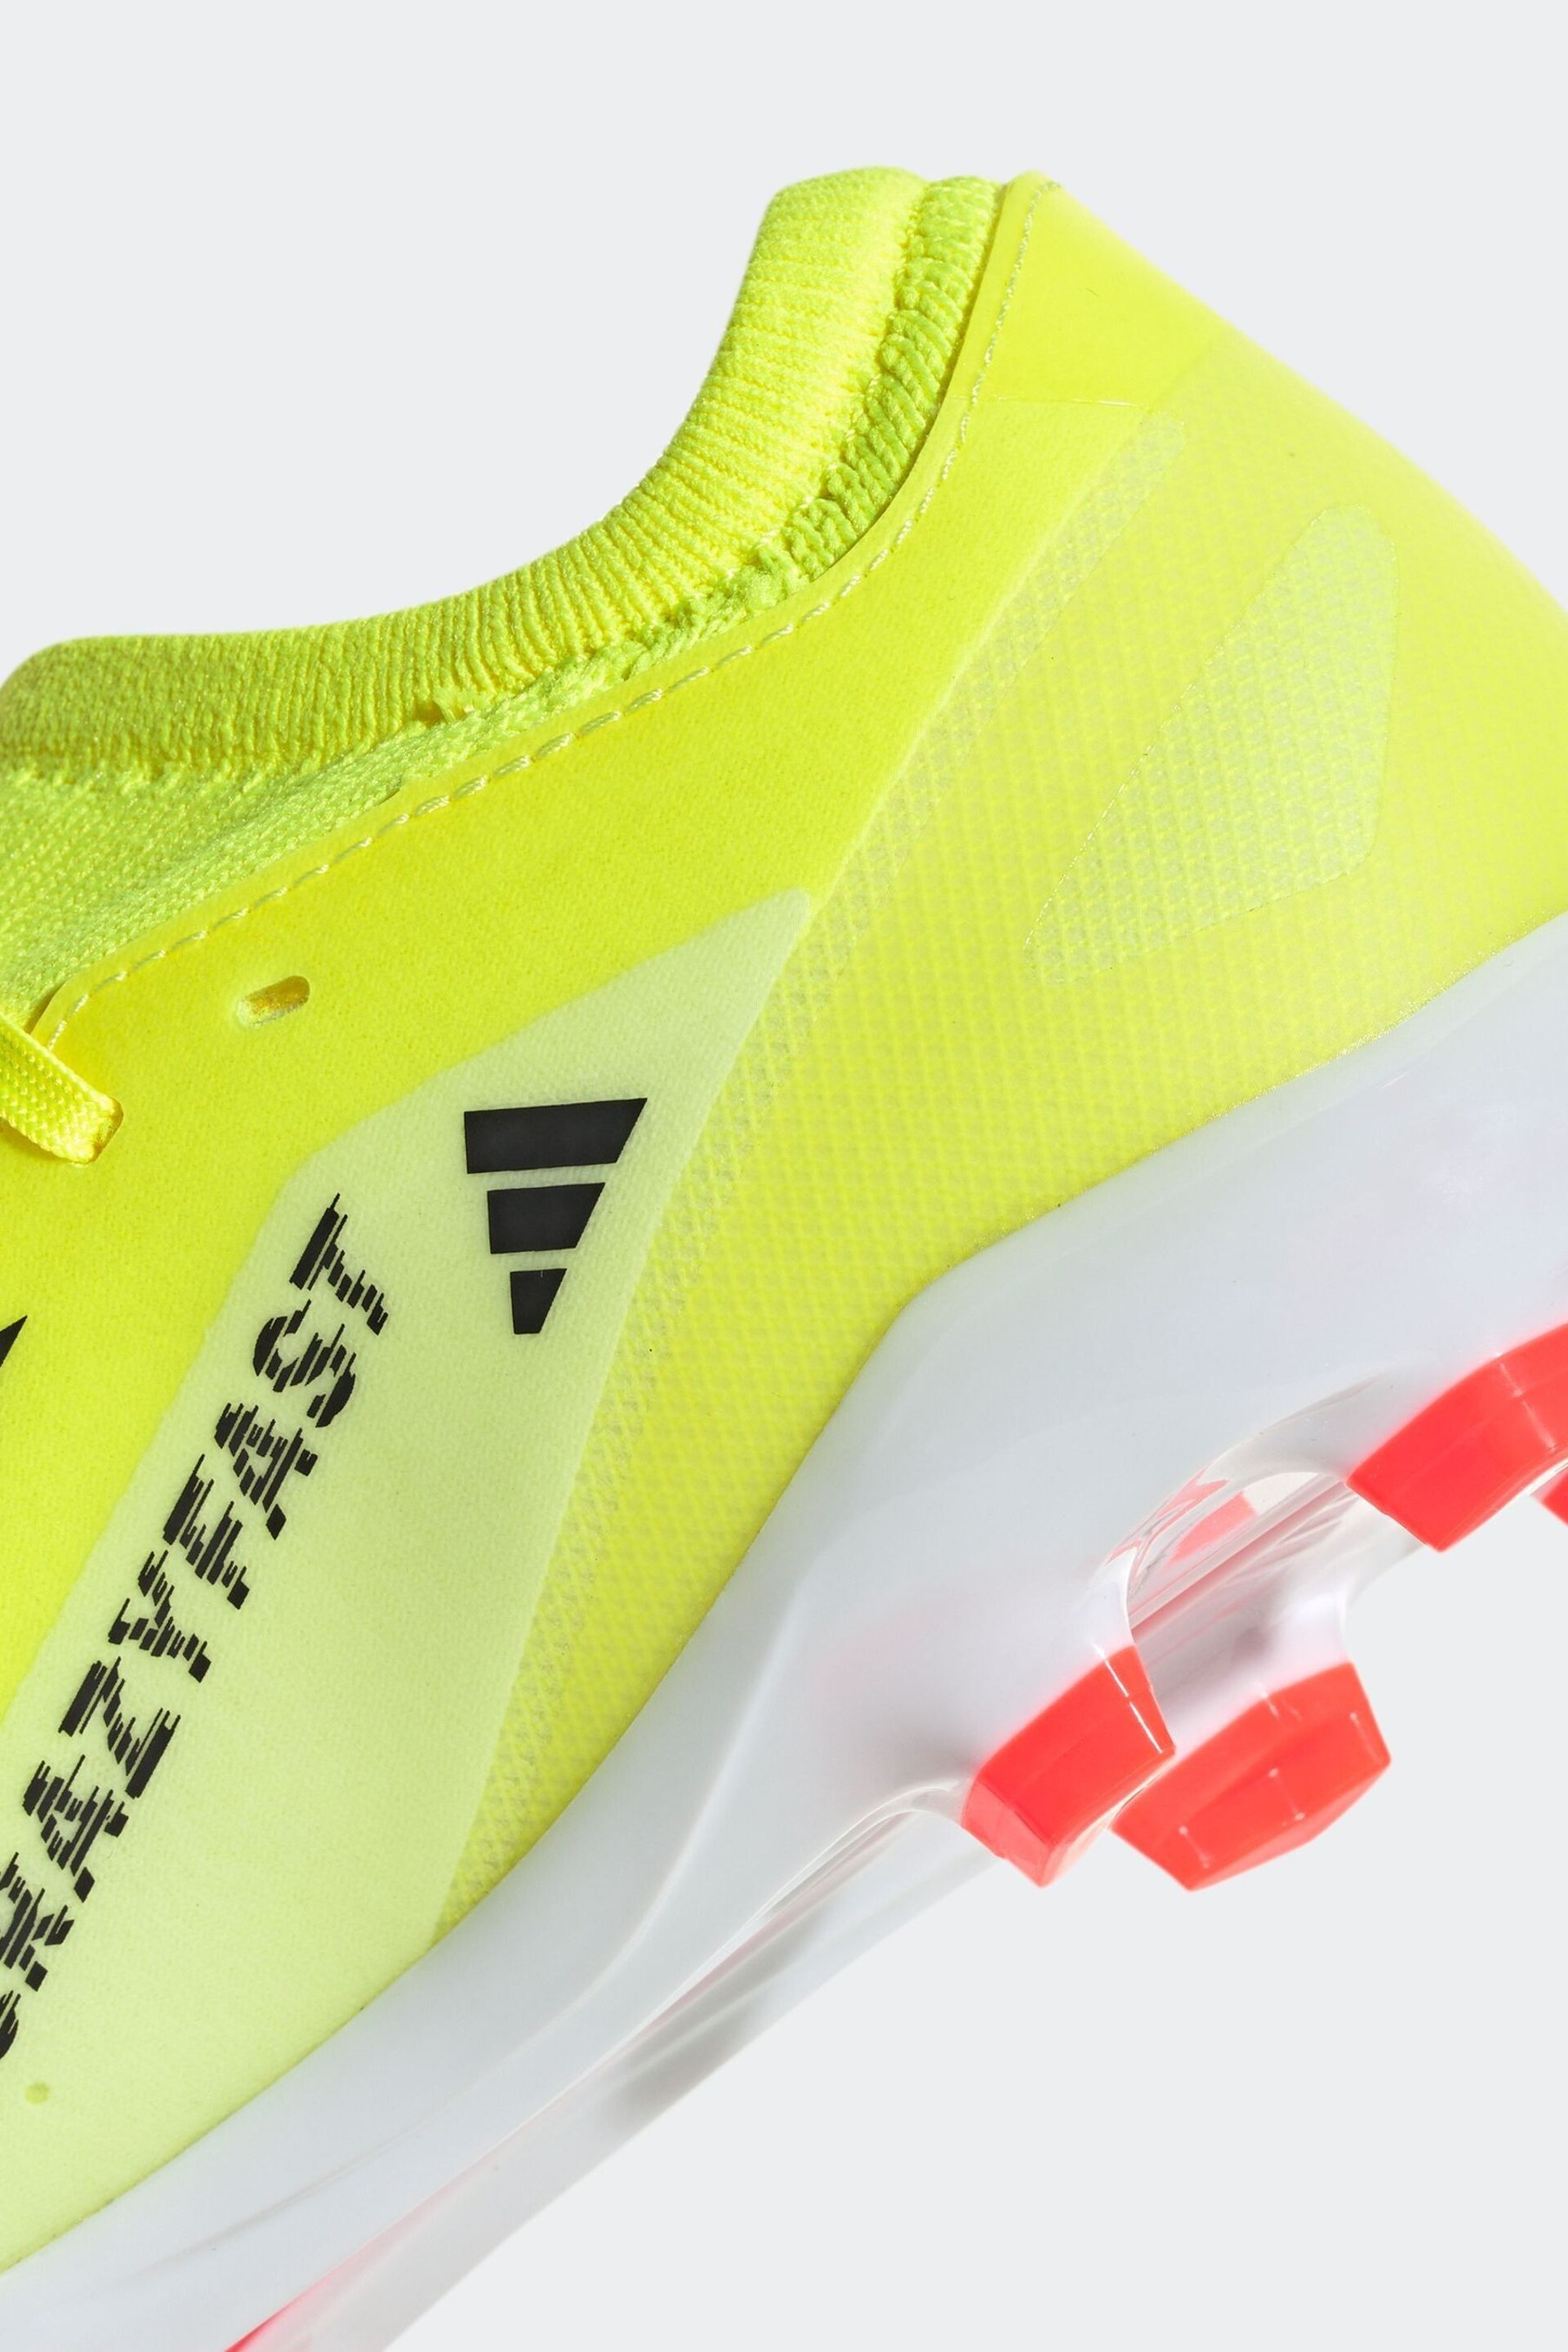 adidas Yellow Football X Crazyfast League Multi-Ground Adult Boots - Image 9 of 9